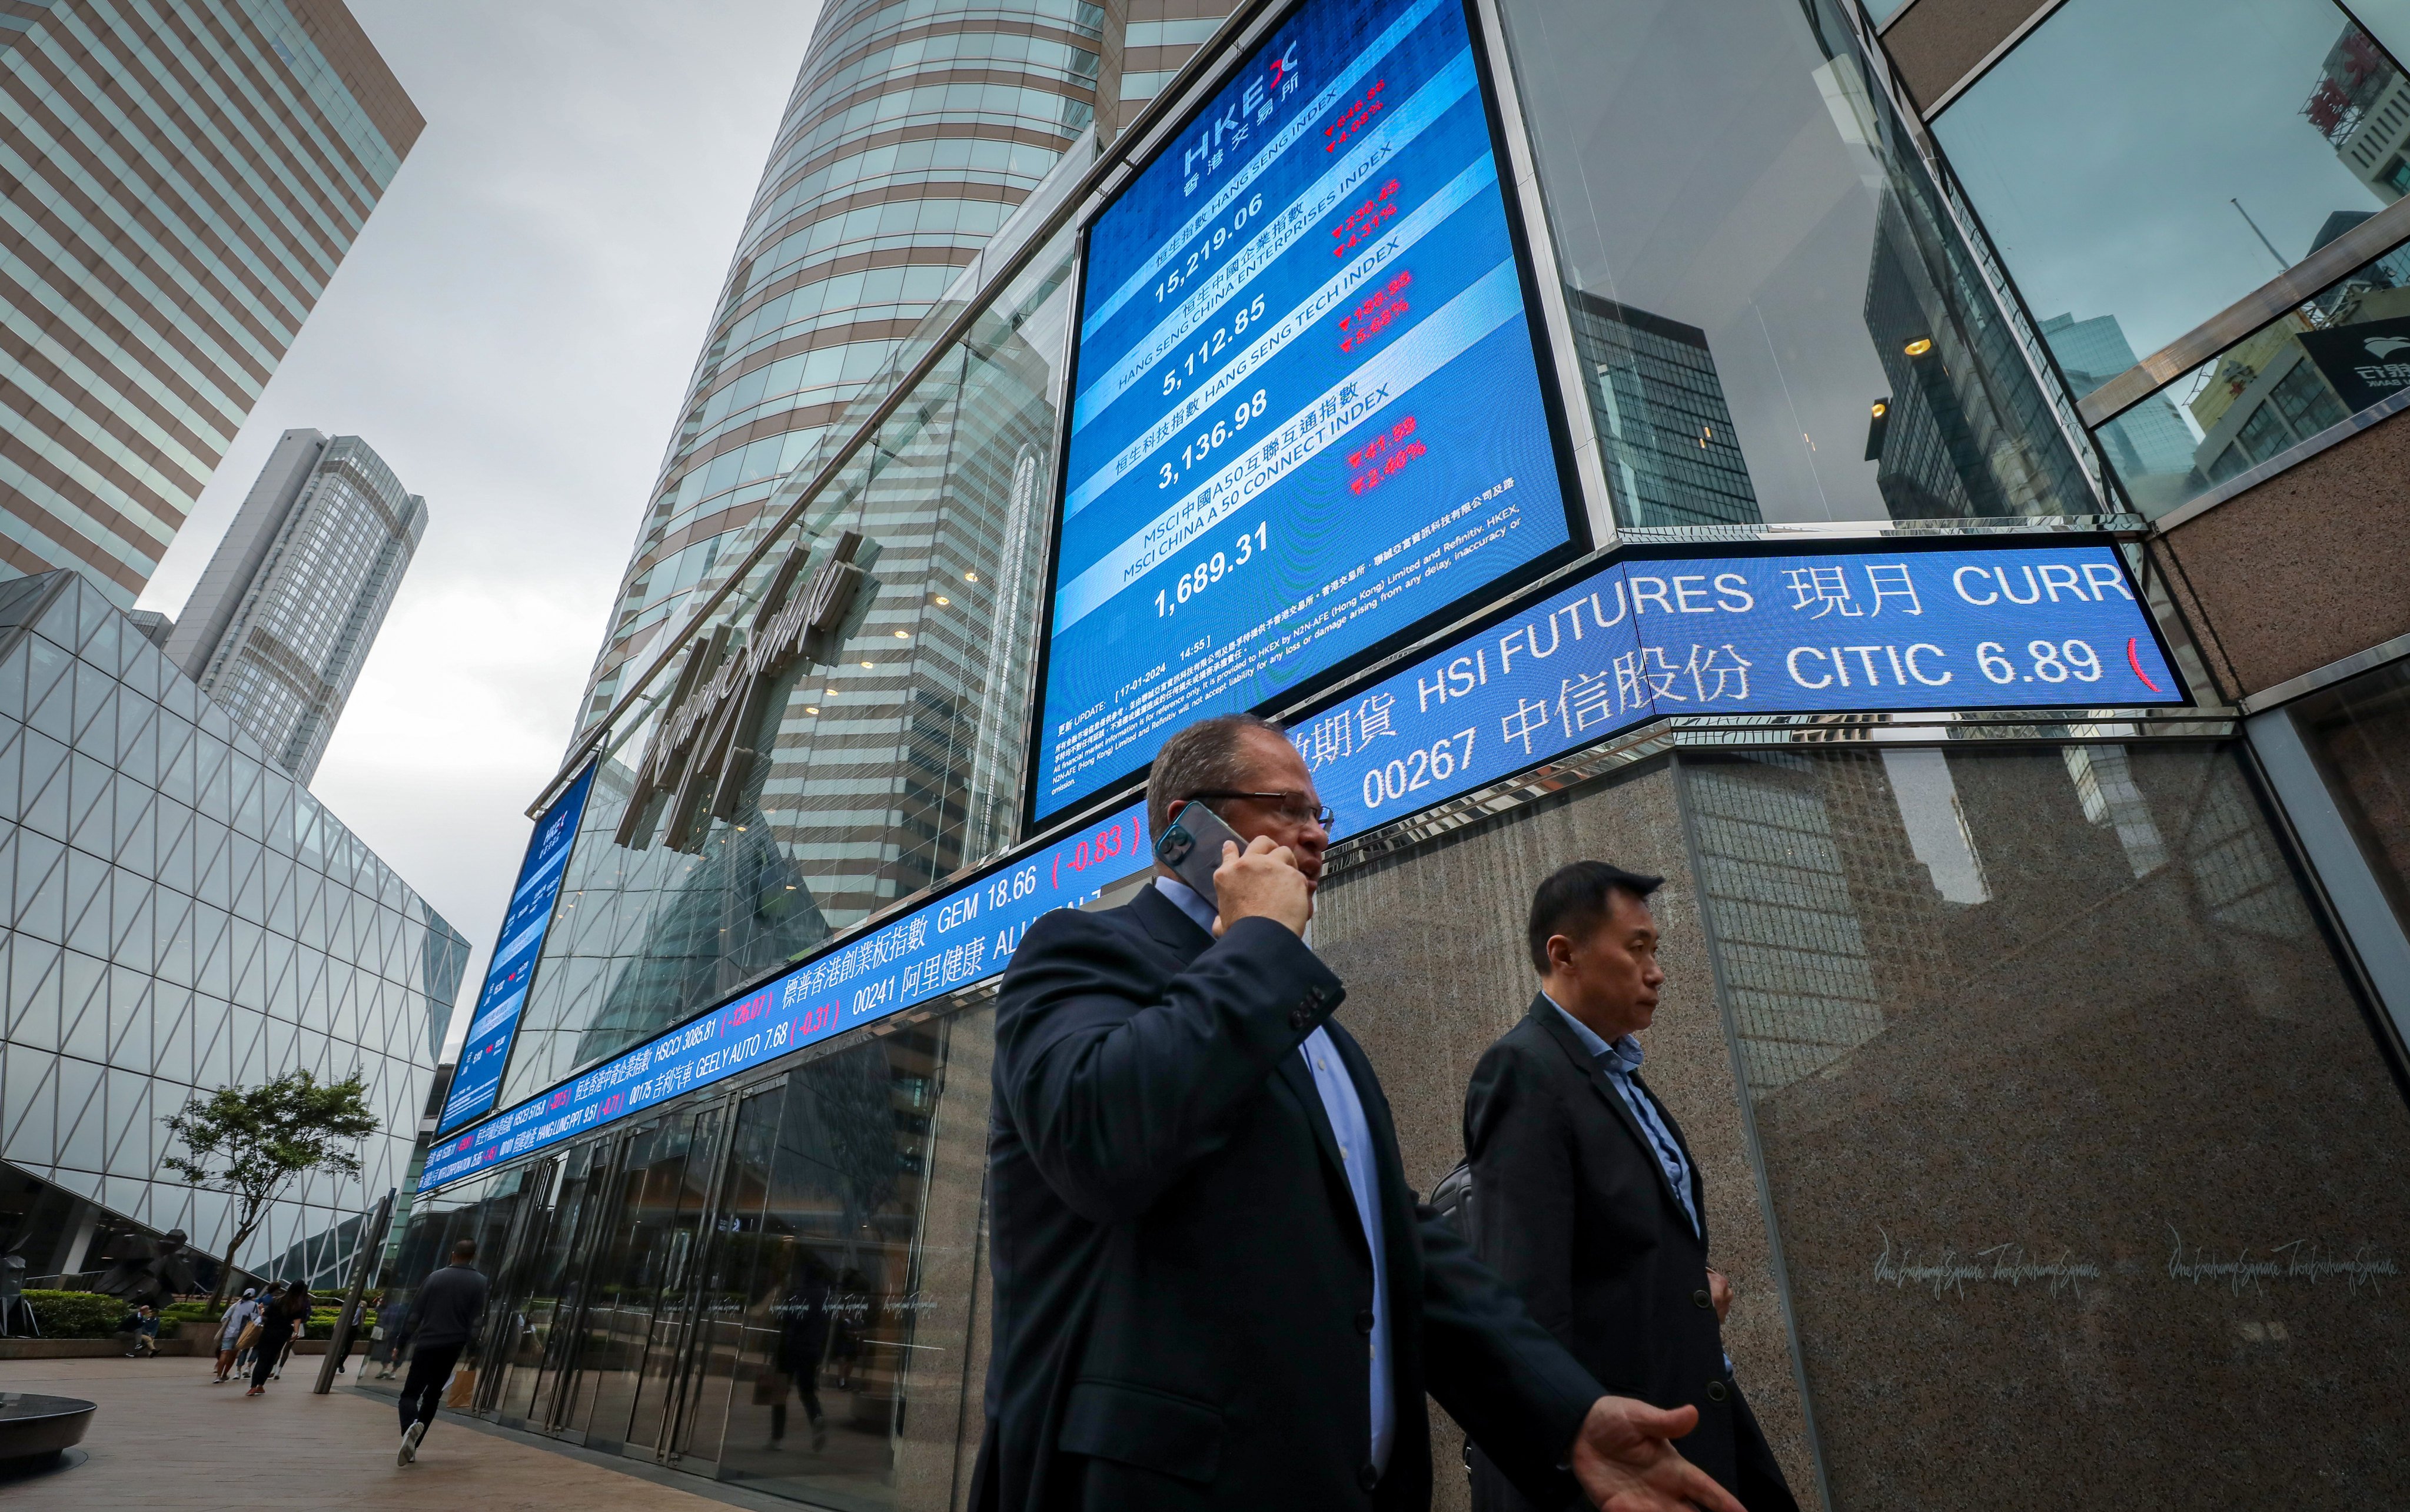 People walk past an electronic display showing the Hang Seng Index at Exchange Square in Central on January 17. The index’s plunge last week sent jitters through the market. Photo: Sun Yeung